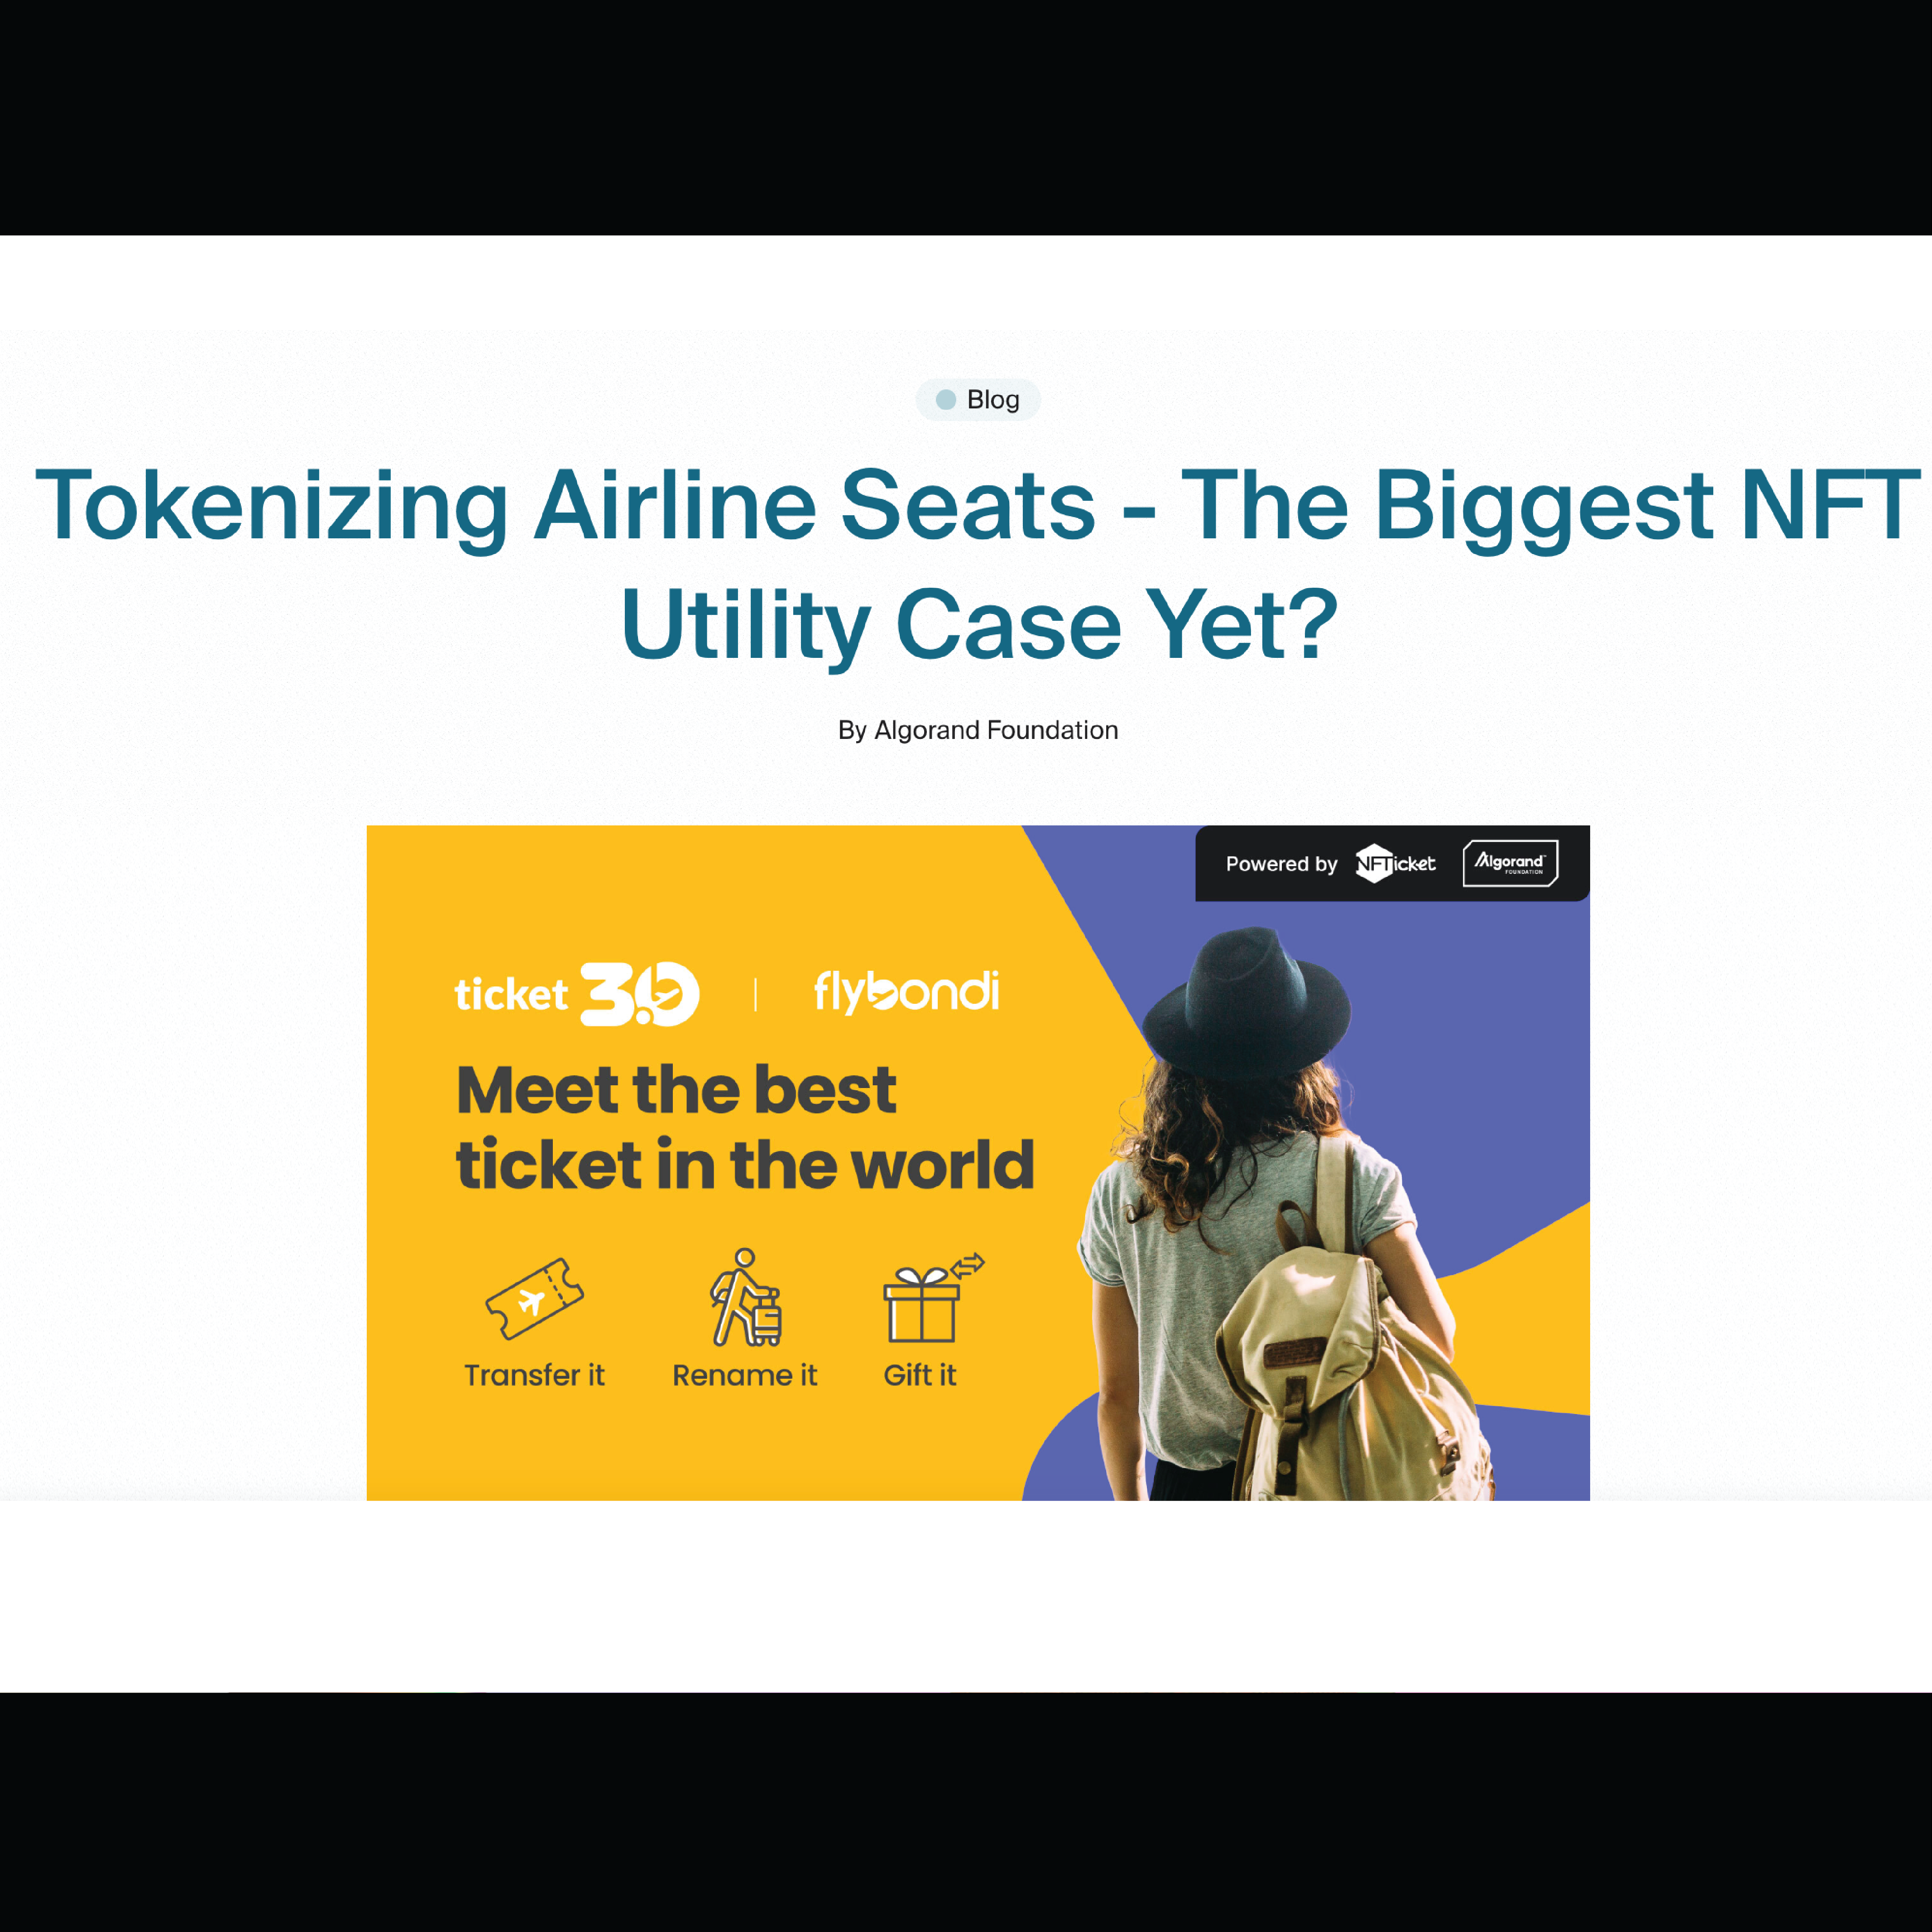 Tokenizing Airline Seats – The Biggest NFT Utility Case Yet?